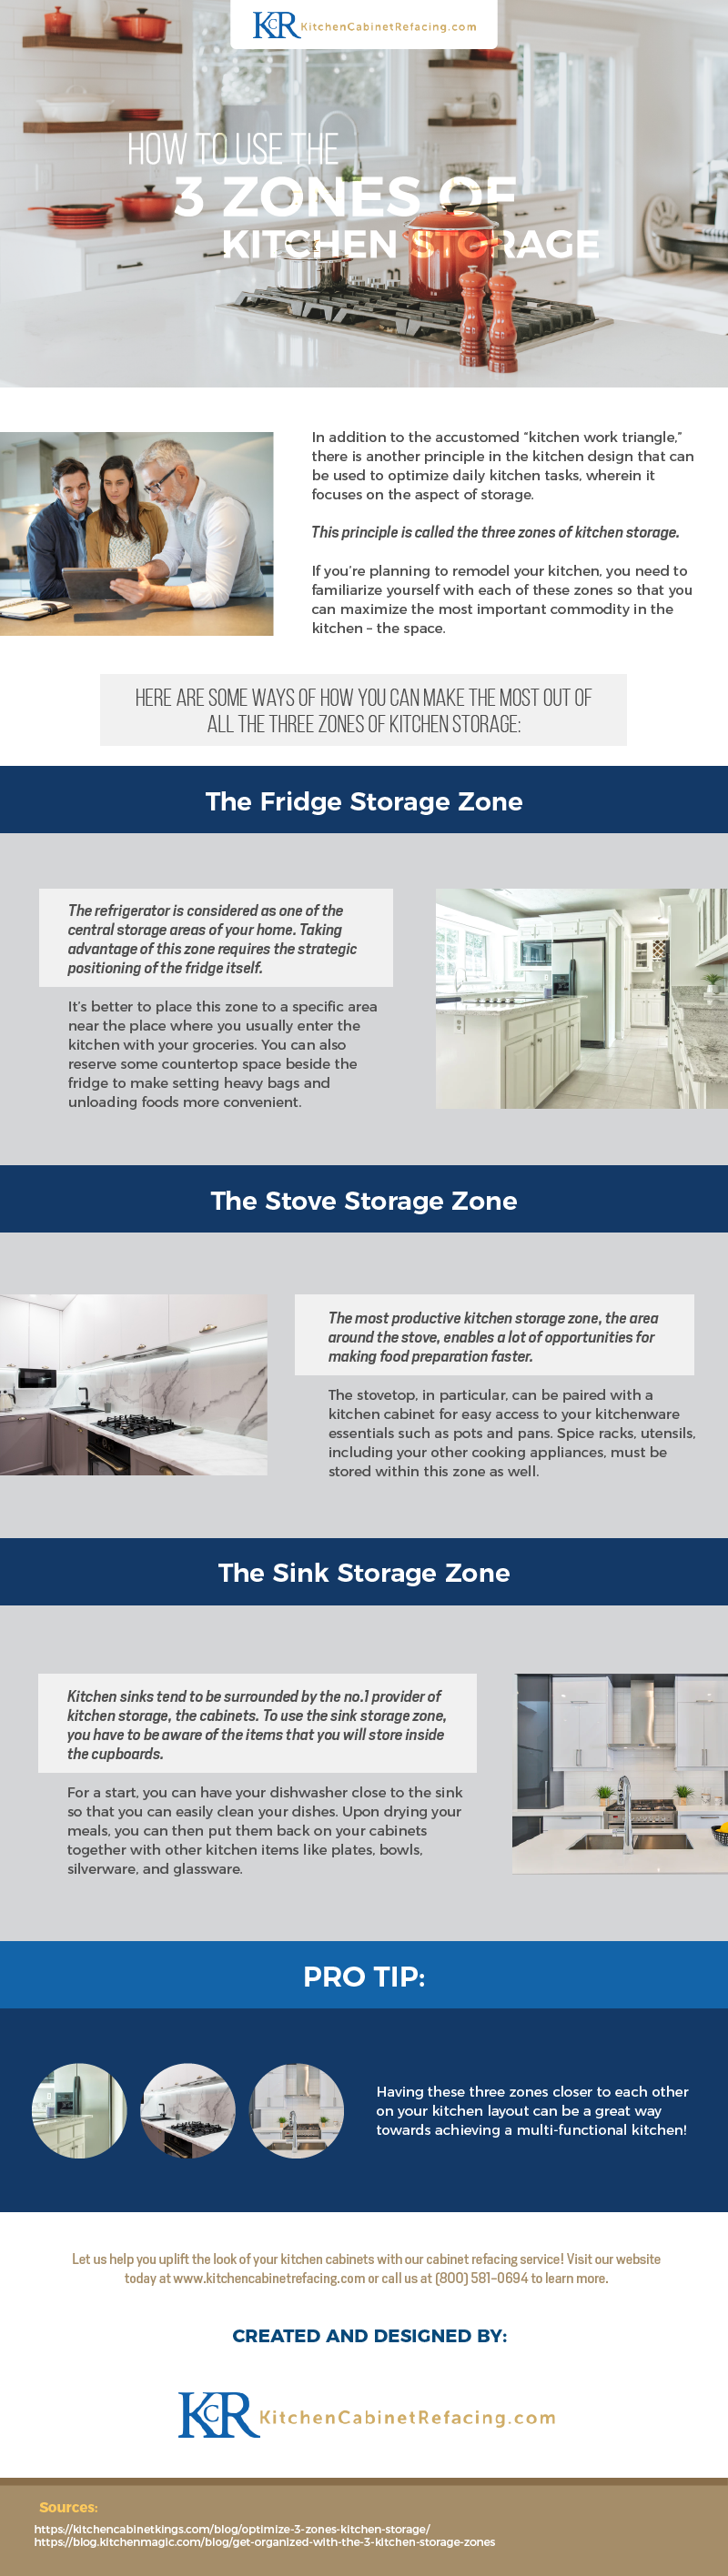 How to Use the 3 Zones of Kitchen Storage